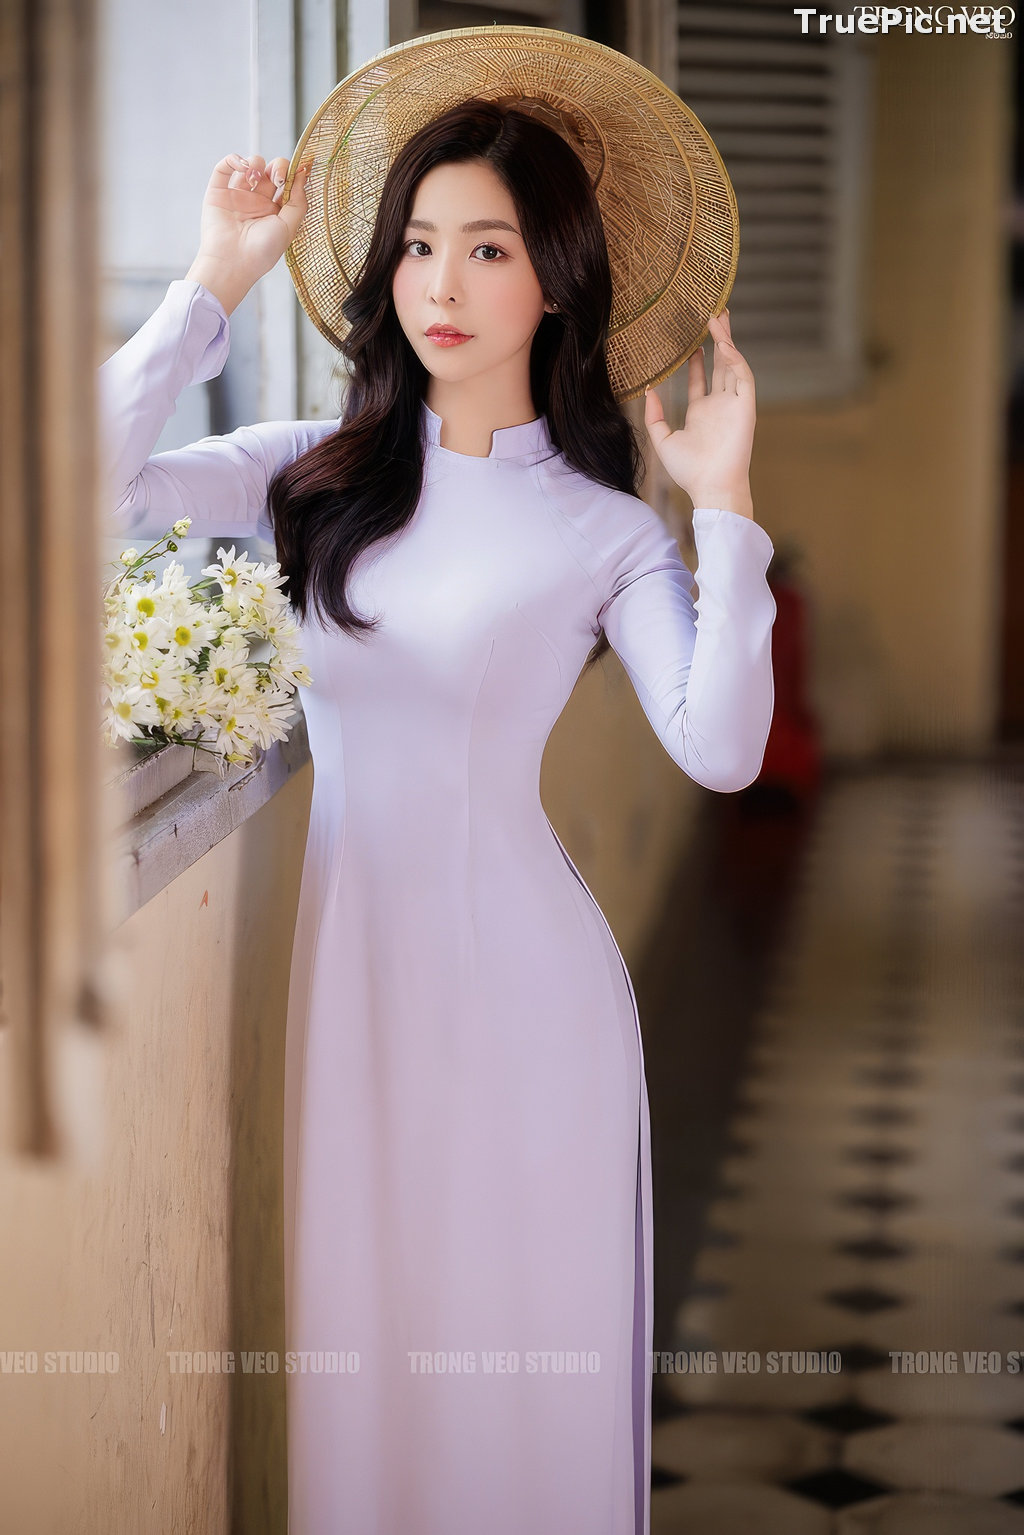 Image Vietnamese Model - Beautiful Girl and Daisy Flower - TruePic.net (129 pictures) - Picture-36